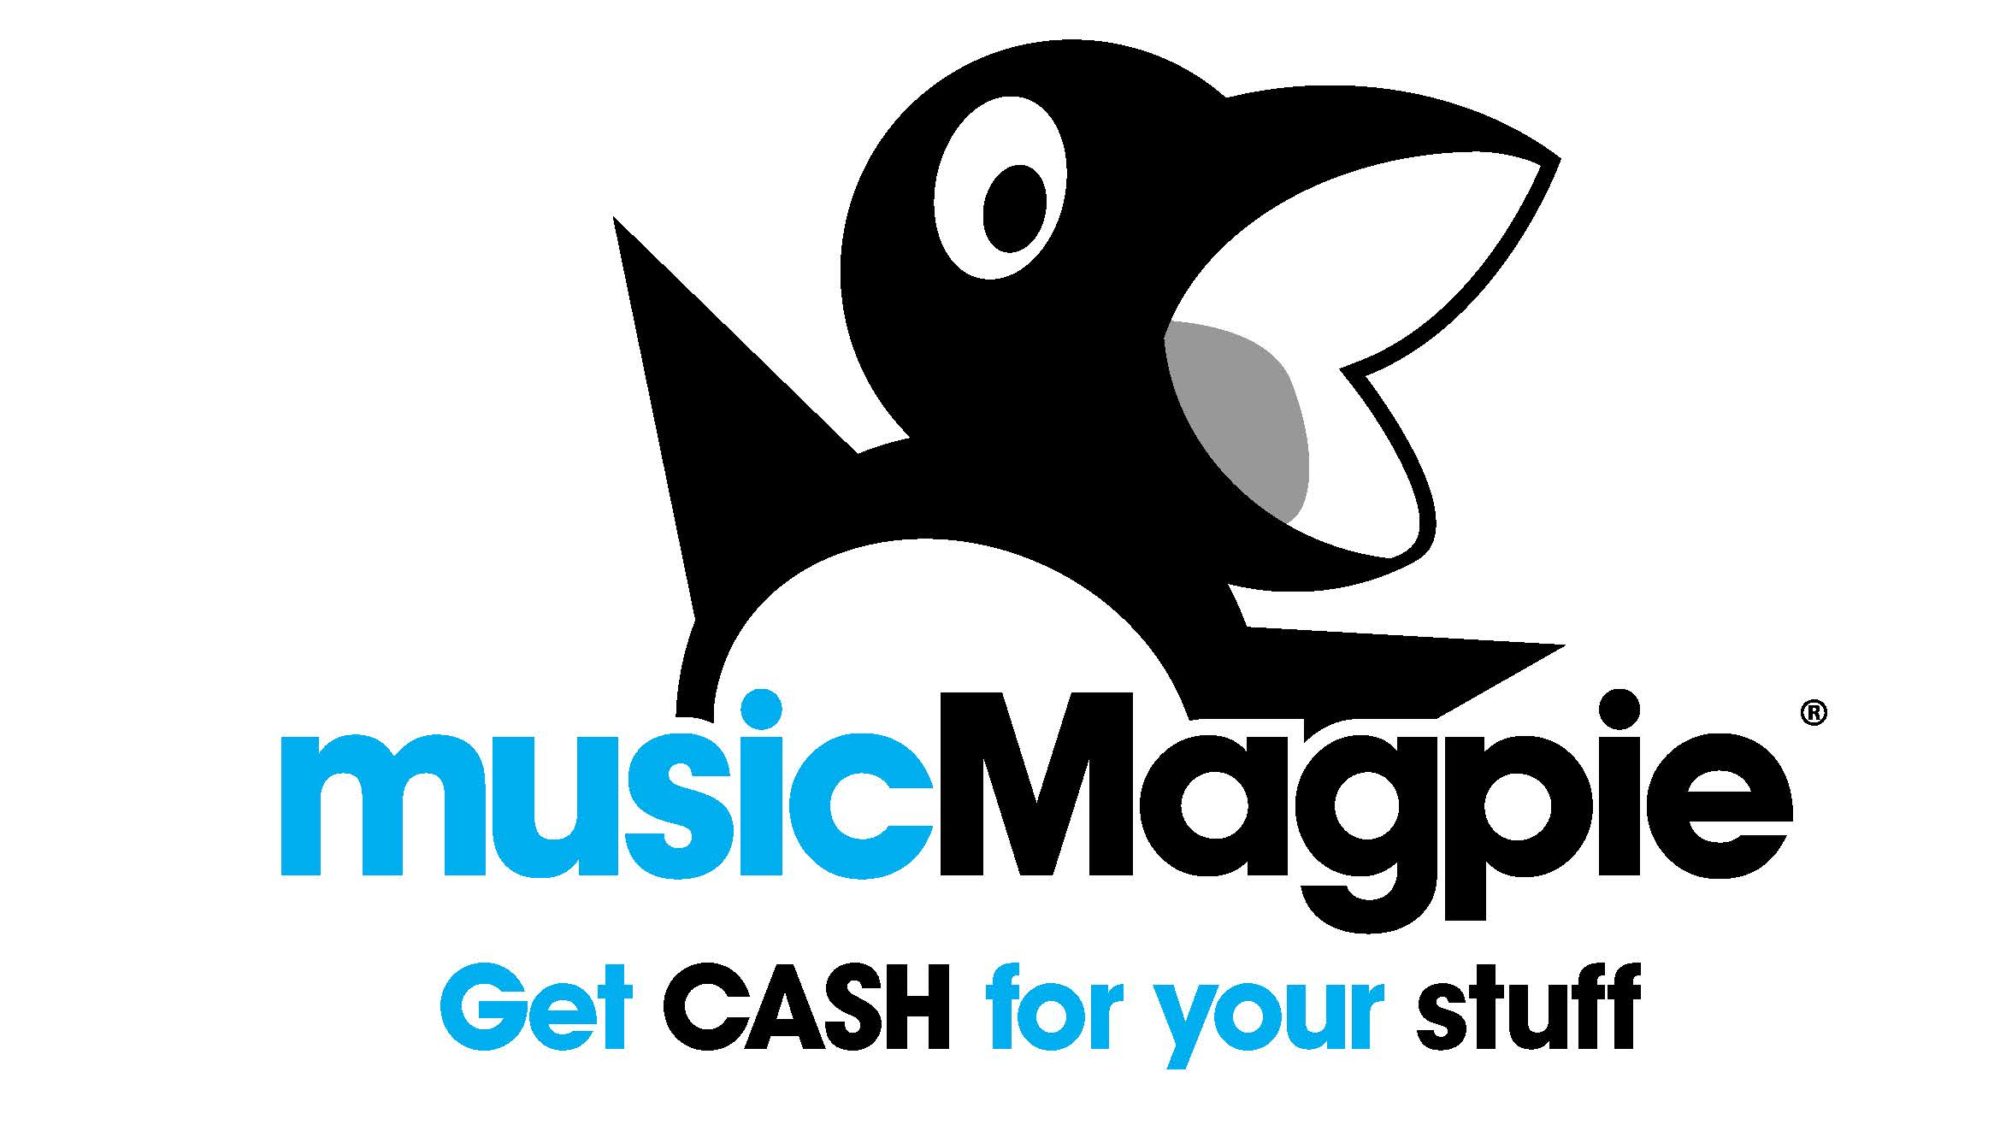 musicMagpie raises £200k for NHS Charities Together